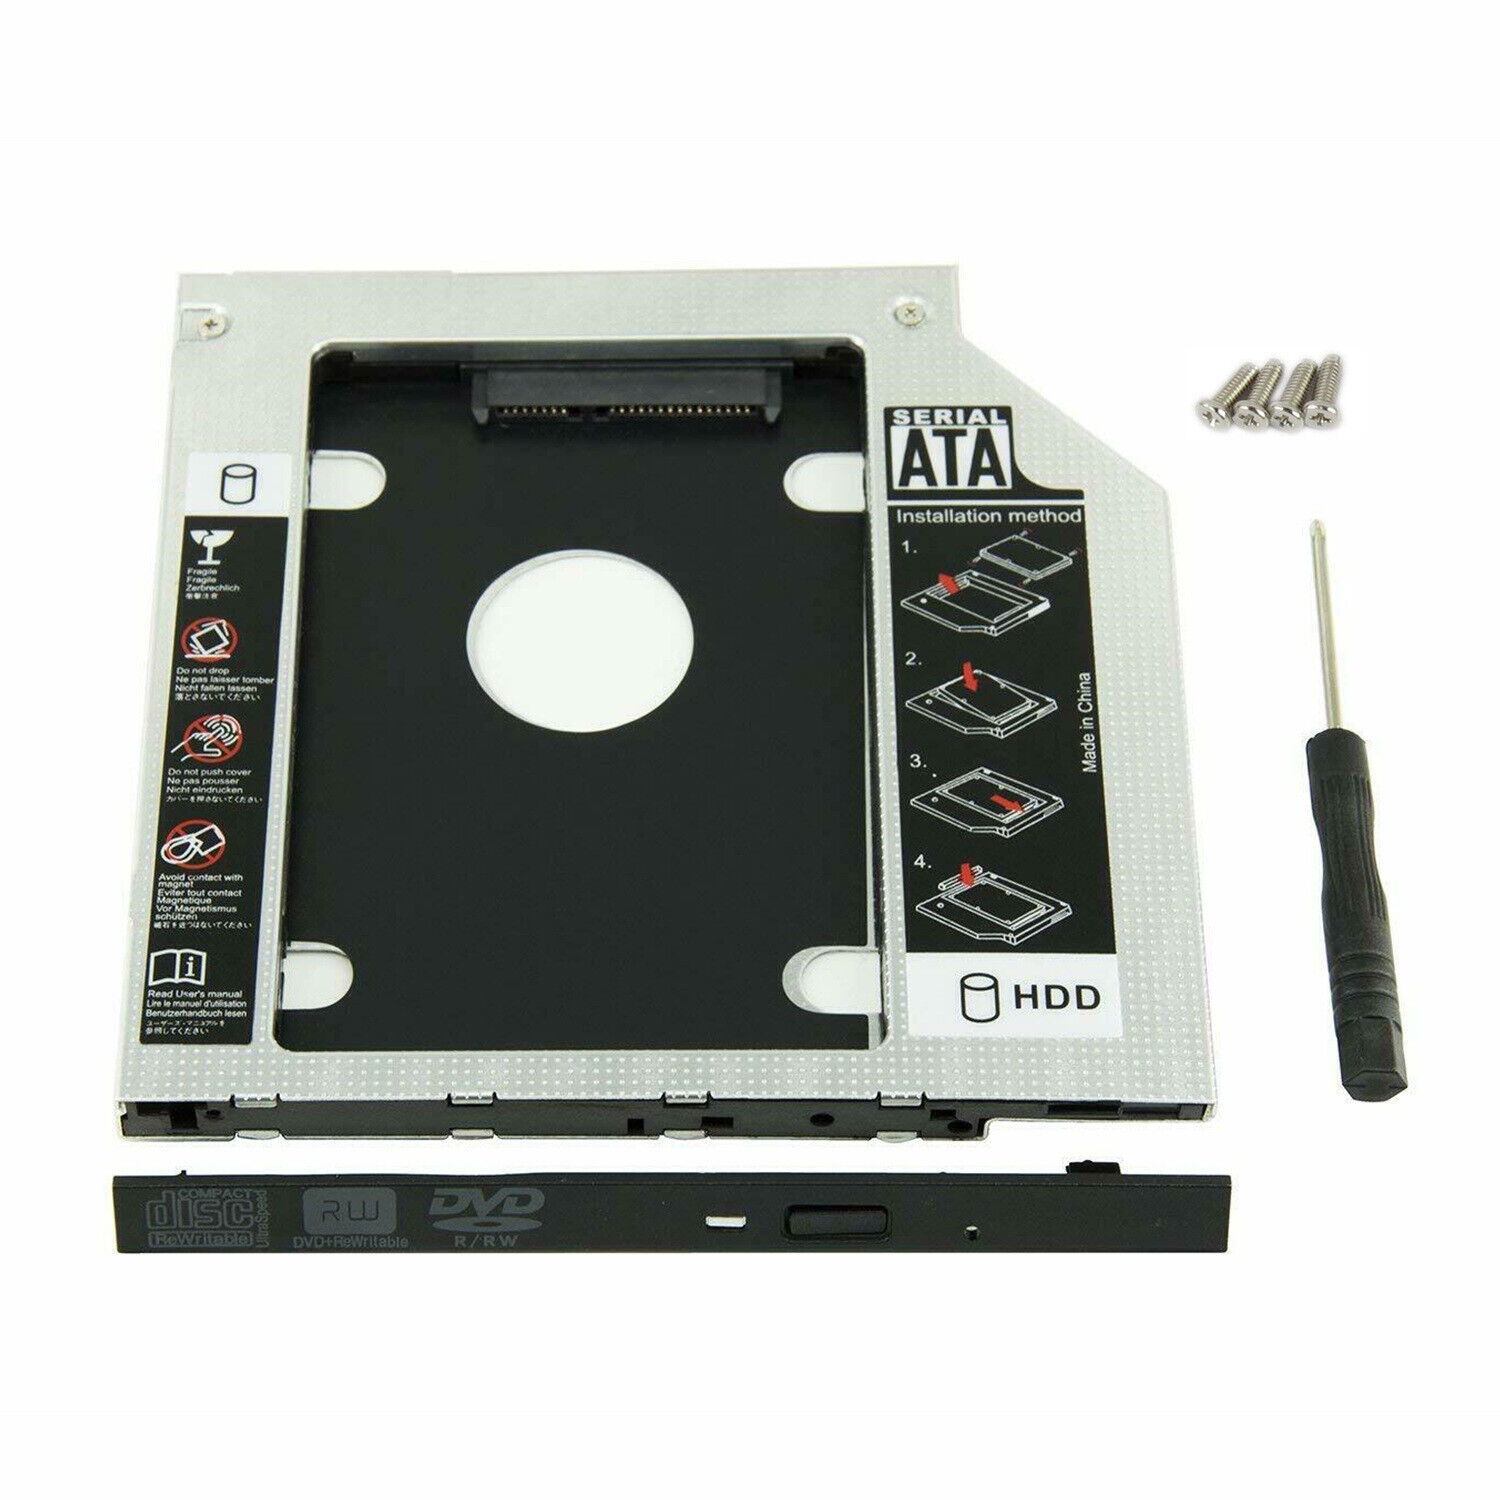 New 9.5mm Universal For SATA 2nd HDD SSD Hard Drive Caddy CD/DVD-ROM Optical Bay